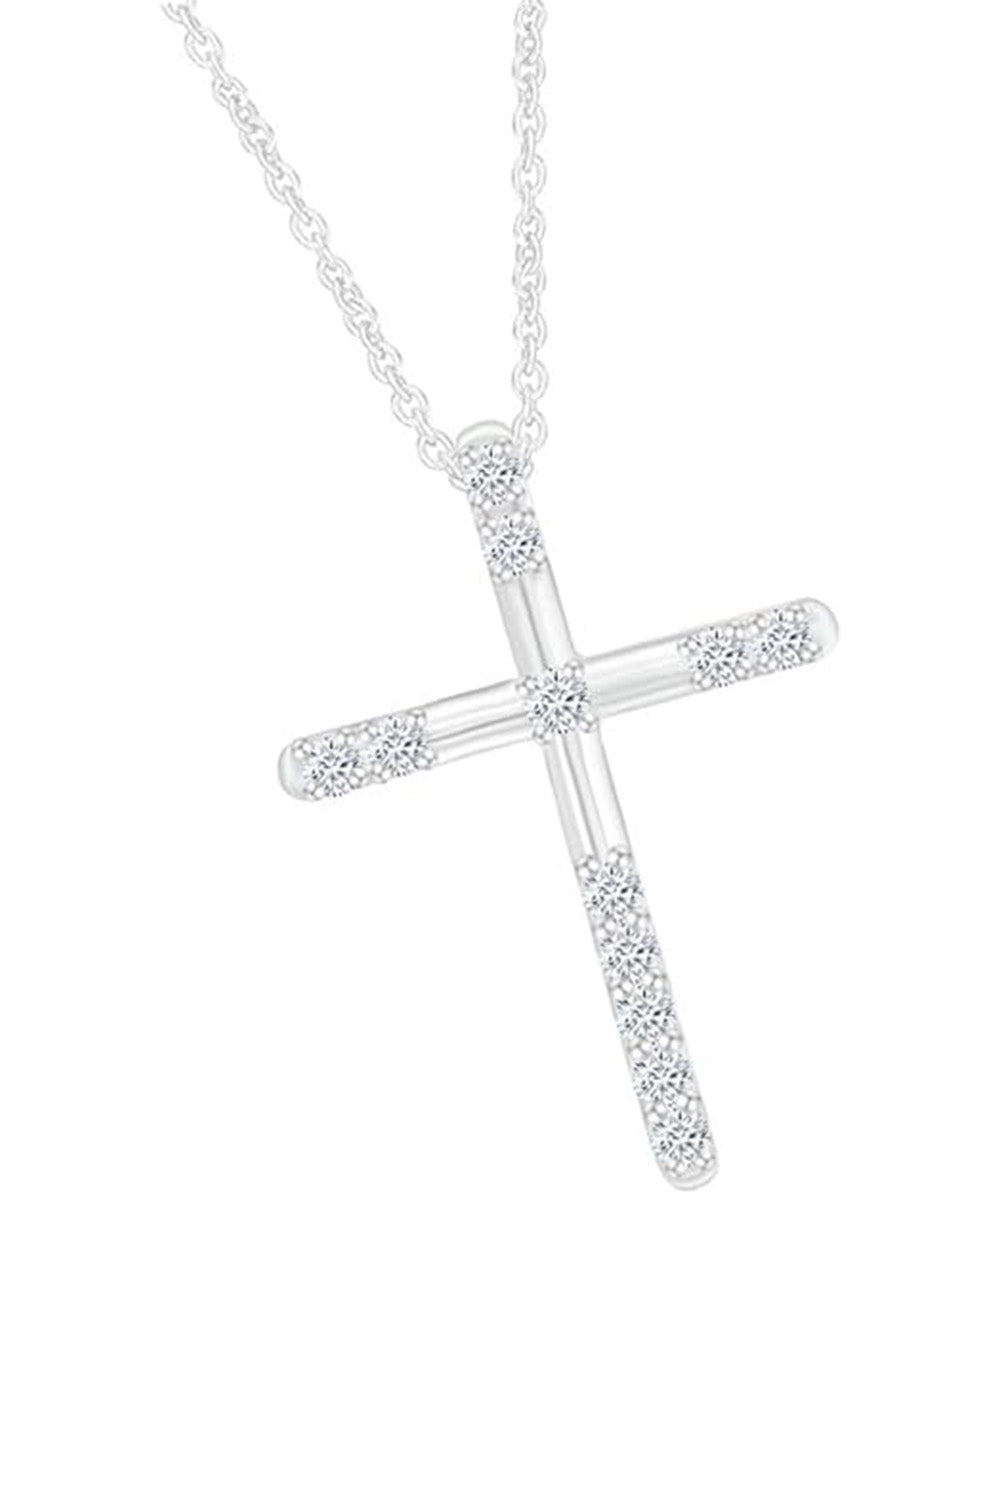 White Gold Color Cross Pendant Necklace for Women, Fashion Jewellery